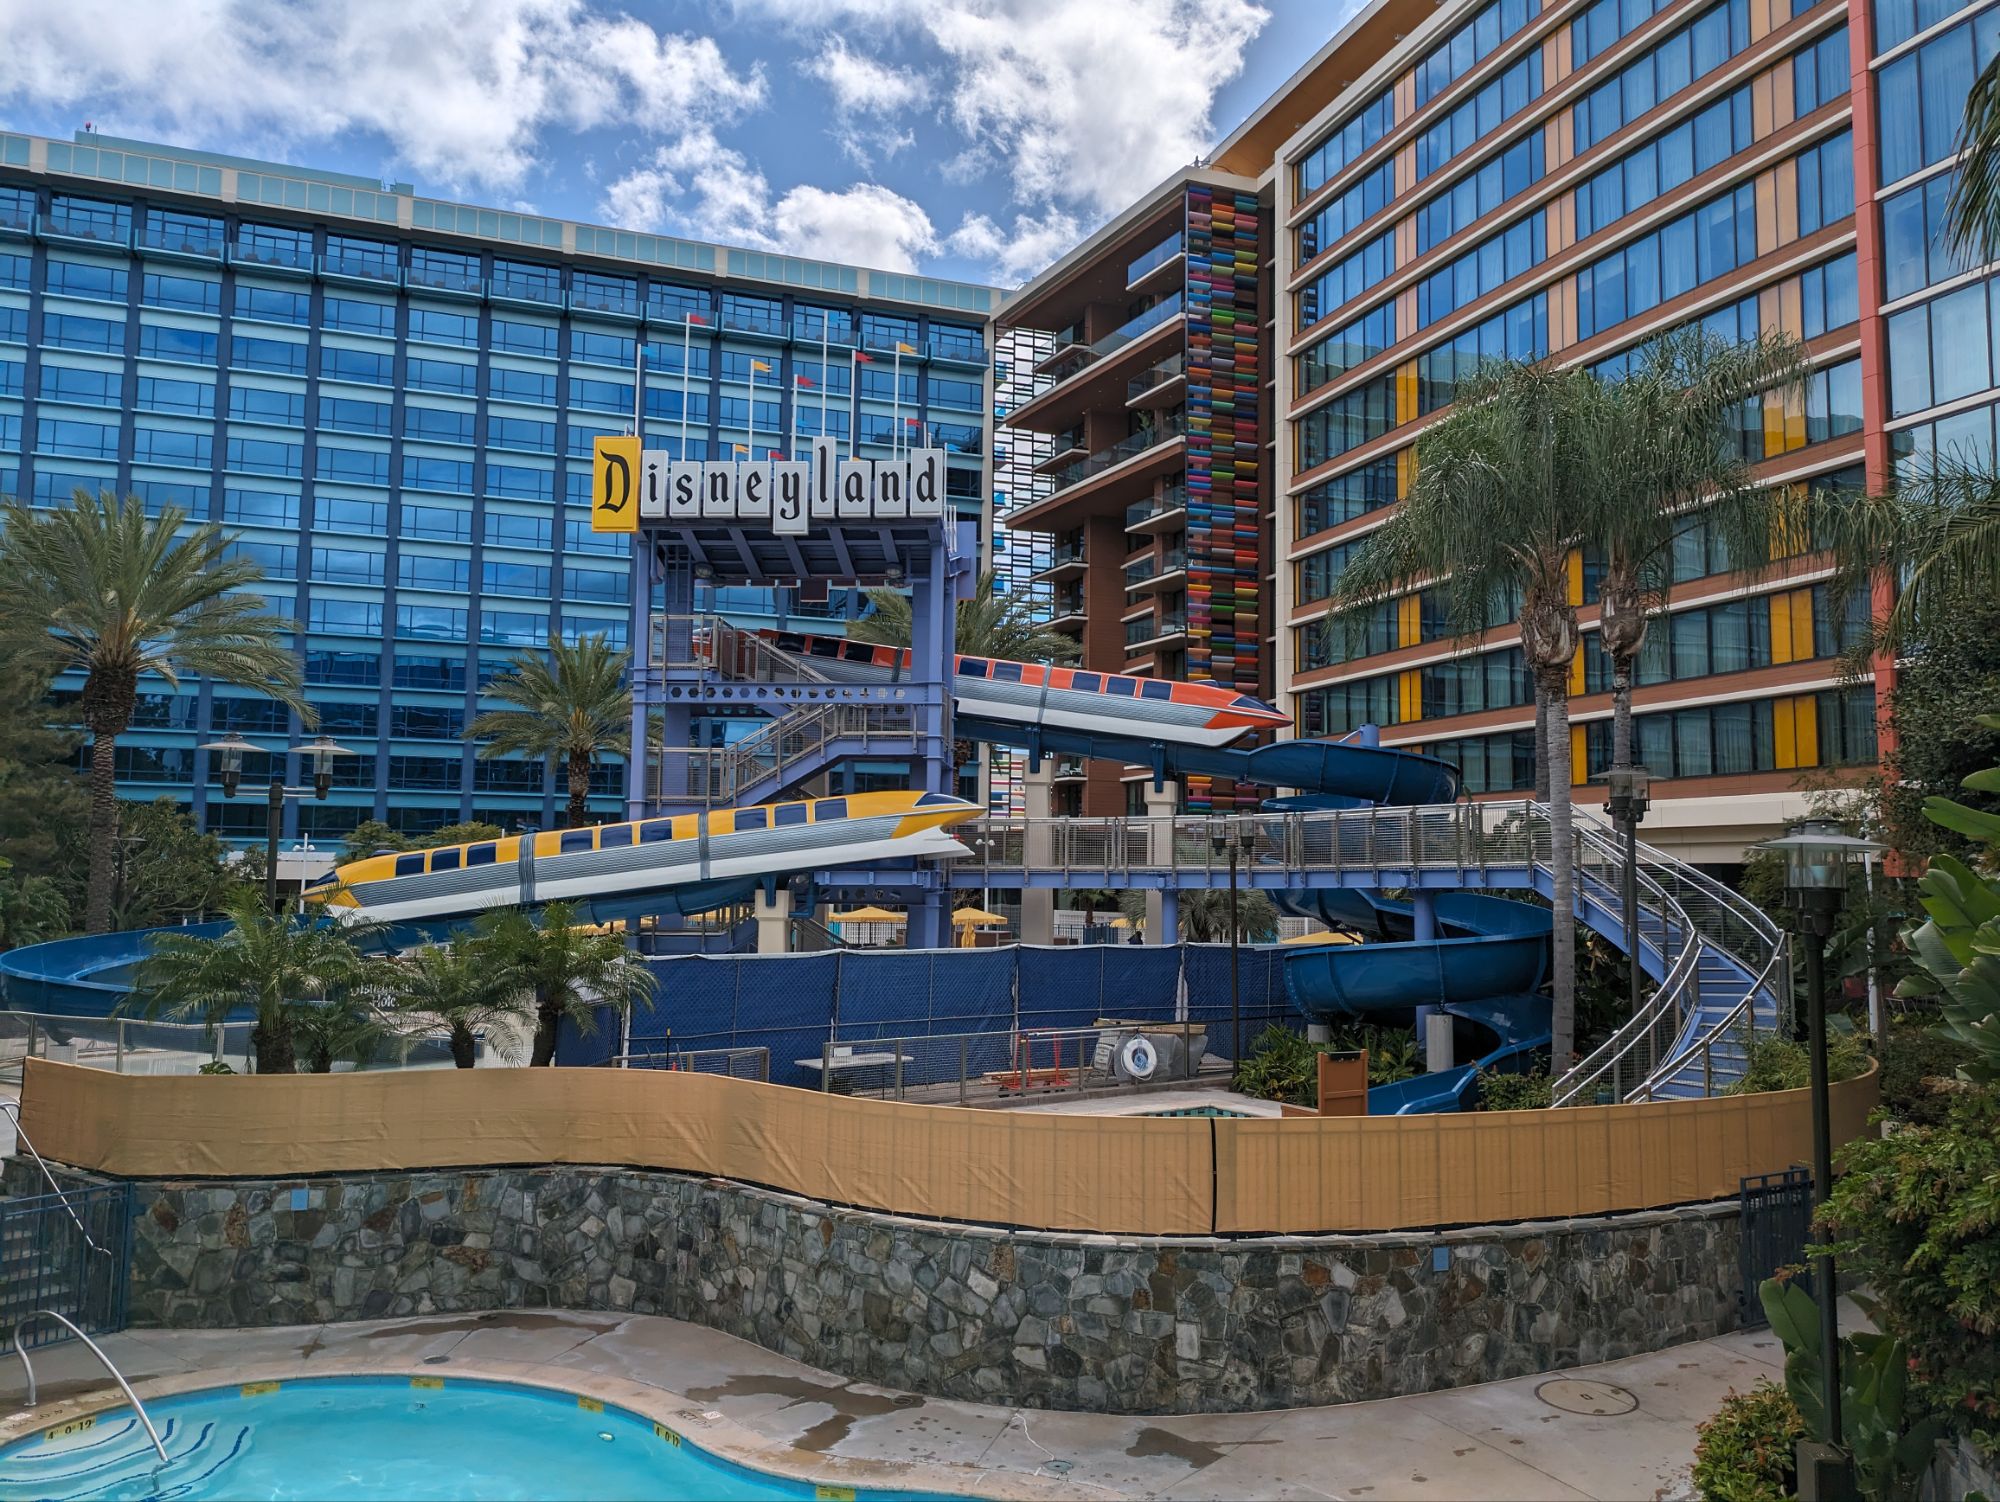 The Disneyland Hotel towers. The water slides are monorails, which makes Josh very happy.